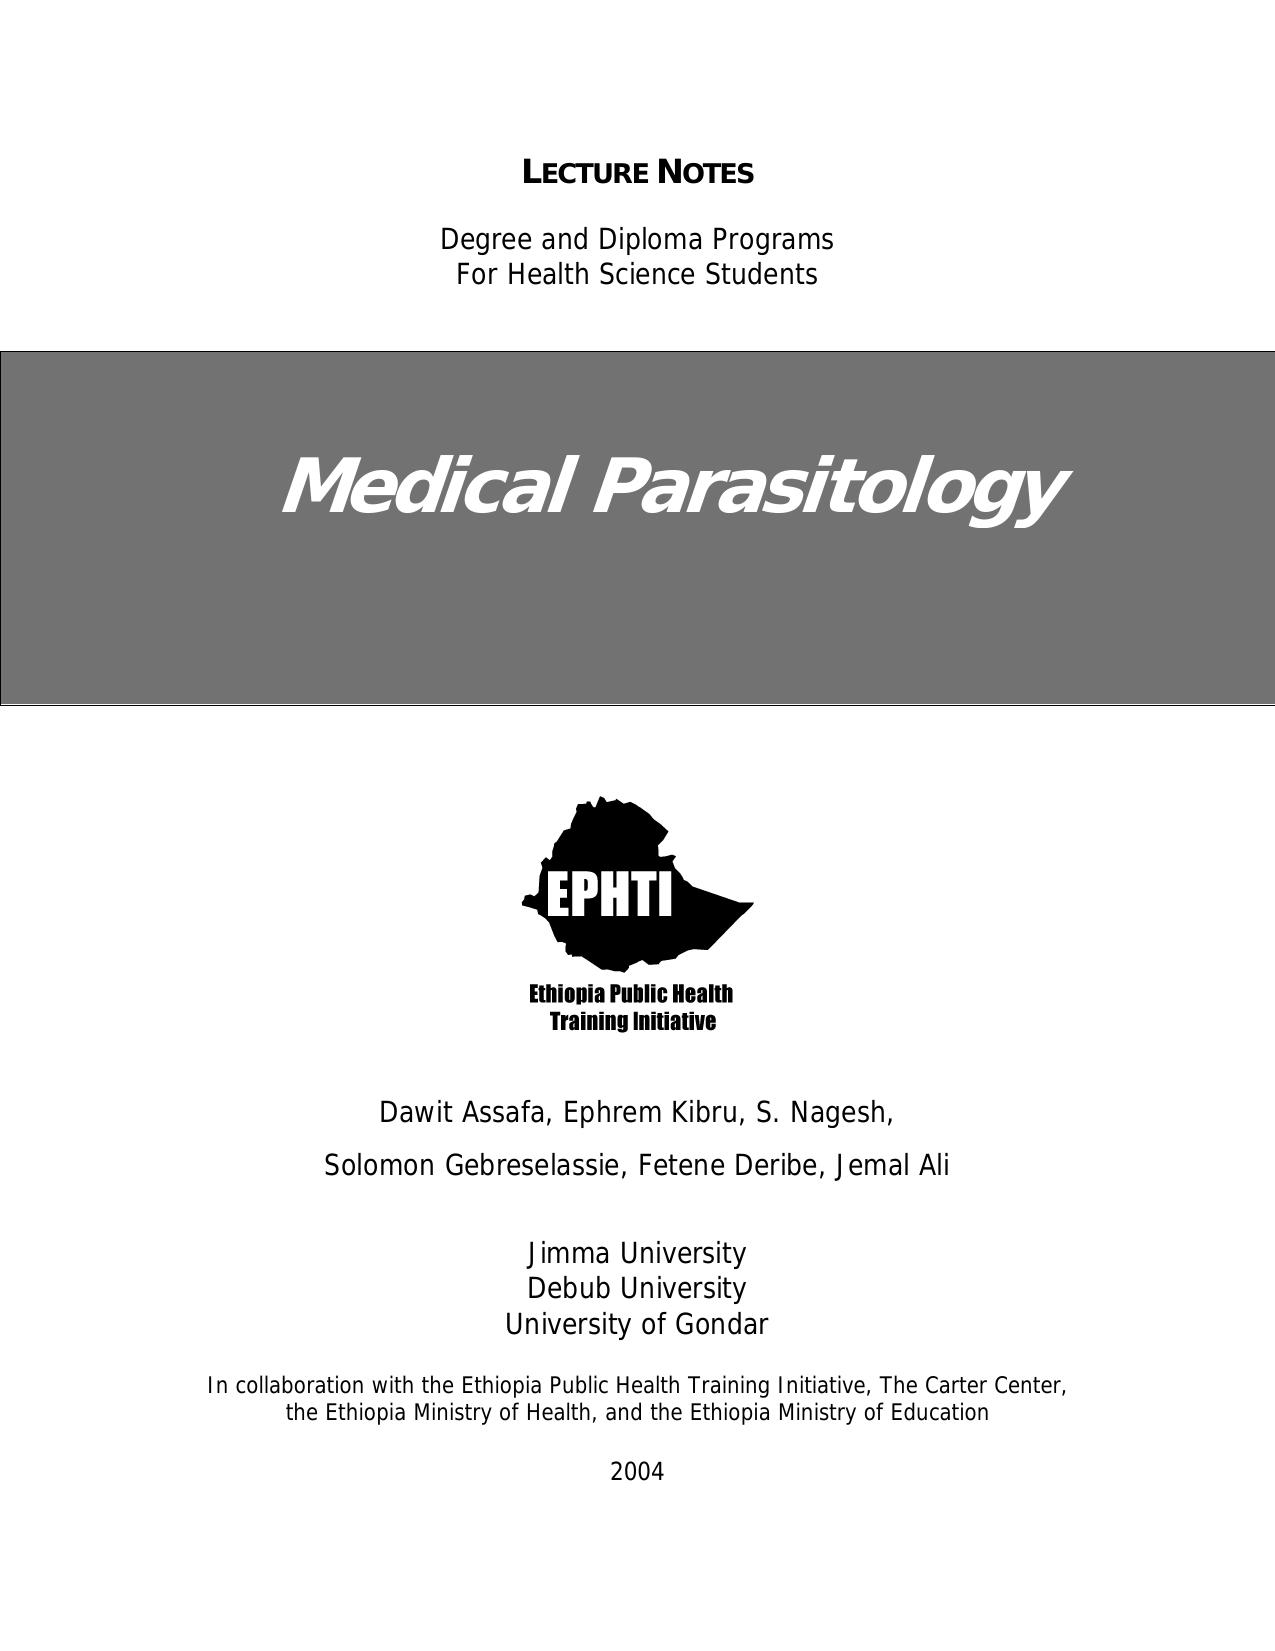 Microsoft Word - lecnote_fm_degree and diploma Med Parasitology